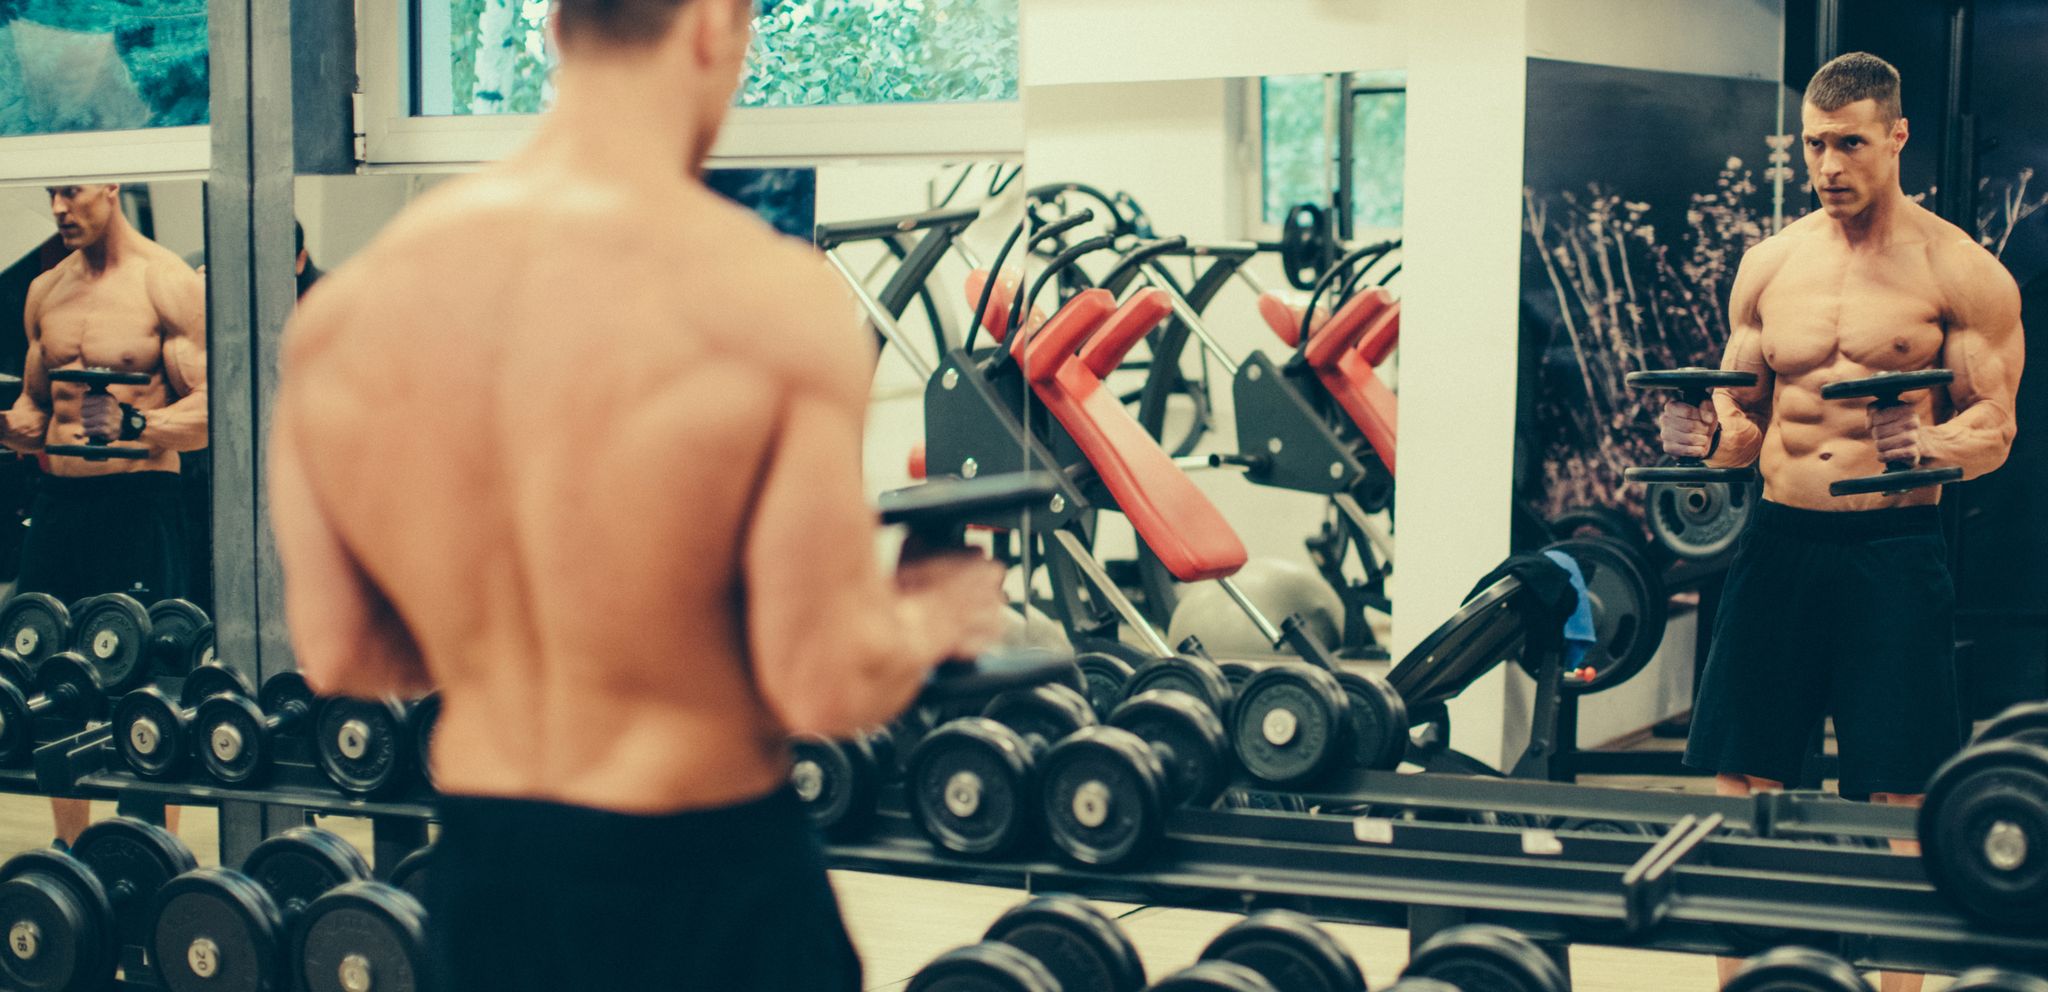 Gym, eat, repeat: the shocking rise of muscle dysmorphia, Body image